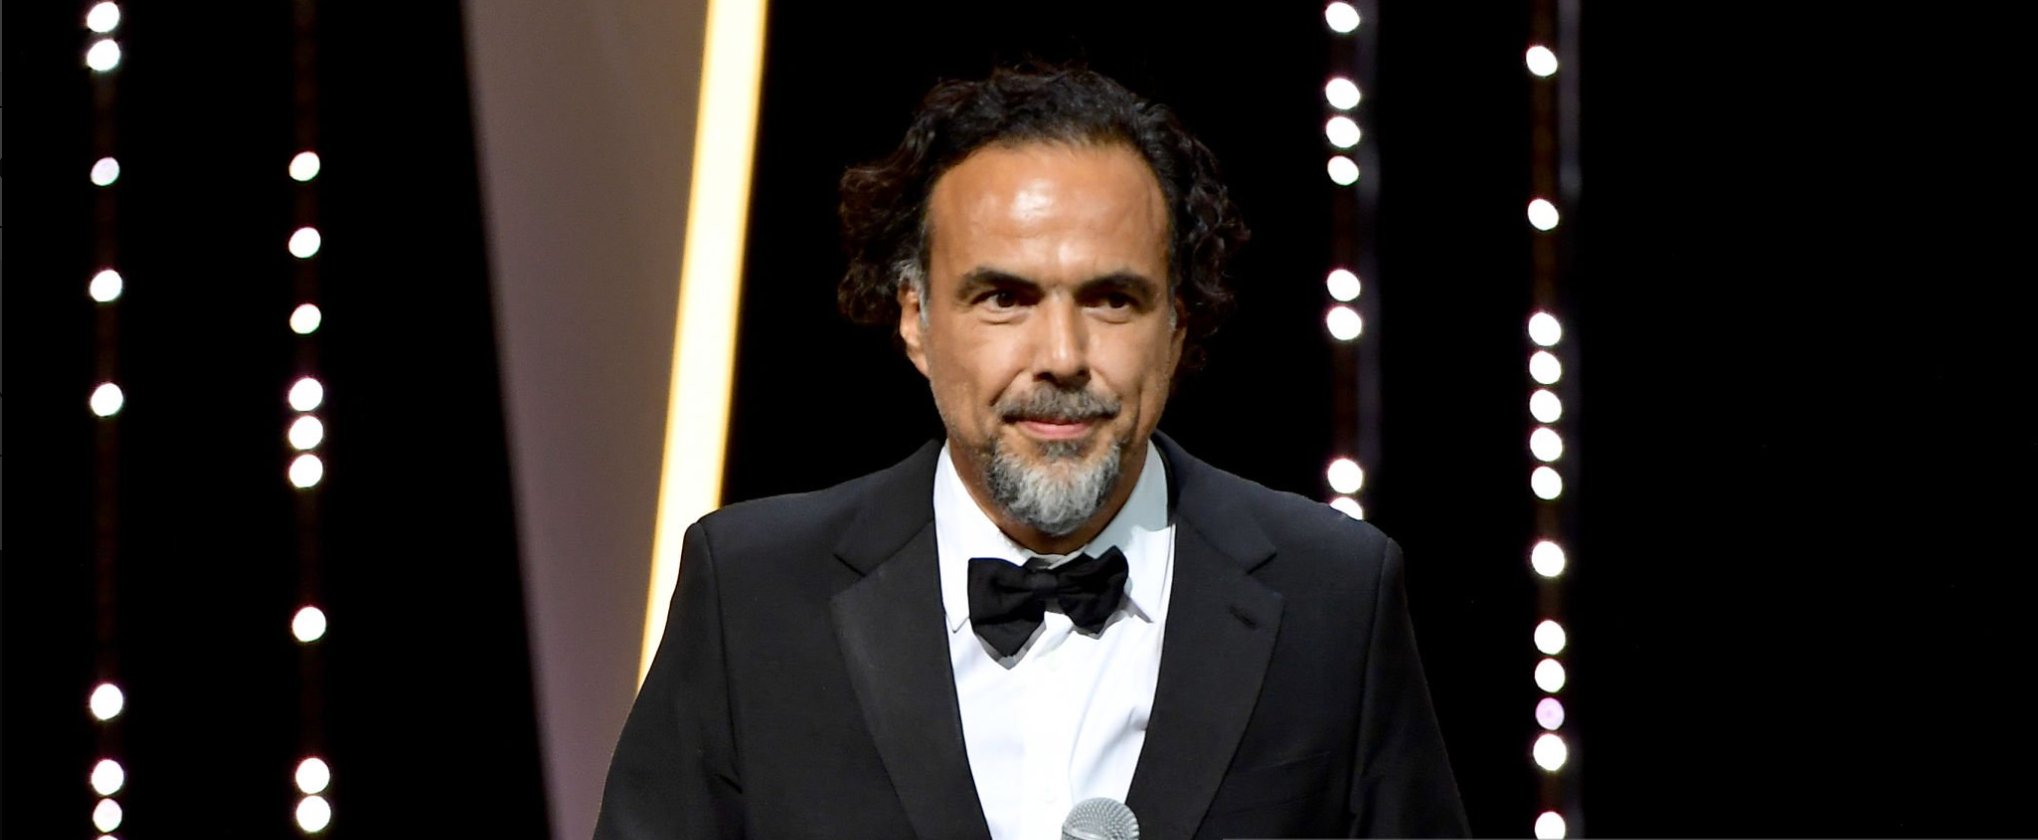 The film by Mexican director Alejandro González Iñárritu will be released in theaters and later on Netflix. Photo: gettyimages.